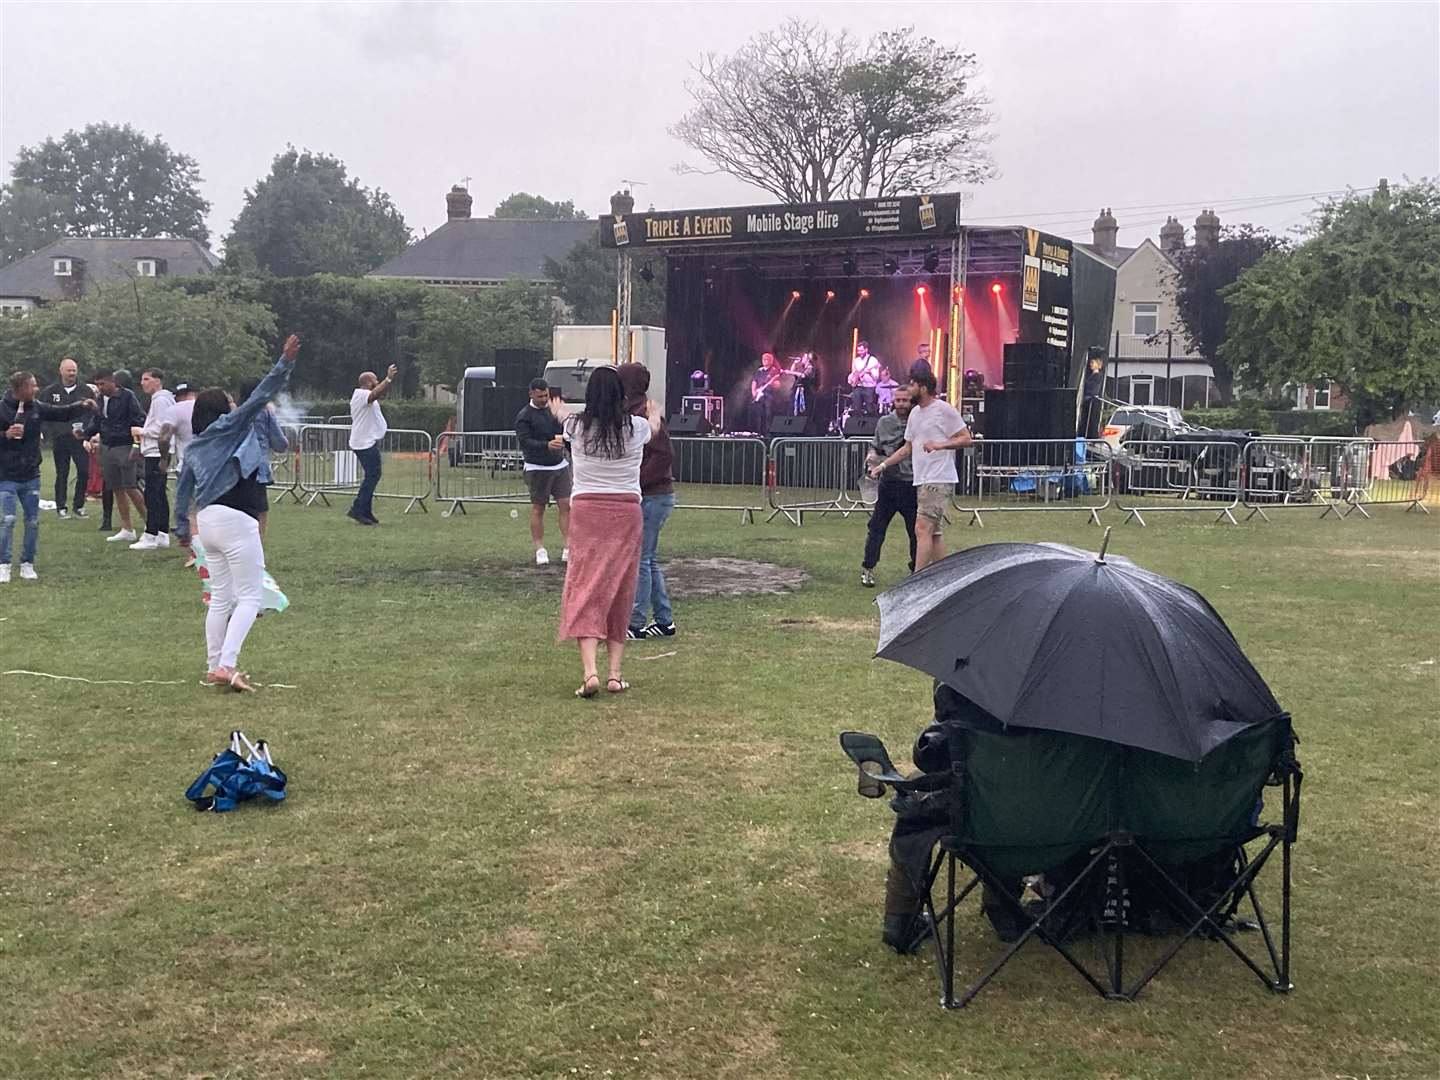 Rain almost stopped play at Sittingbourne's Party in the Park